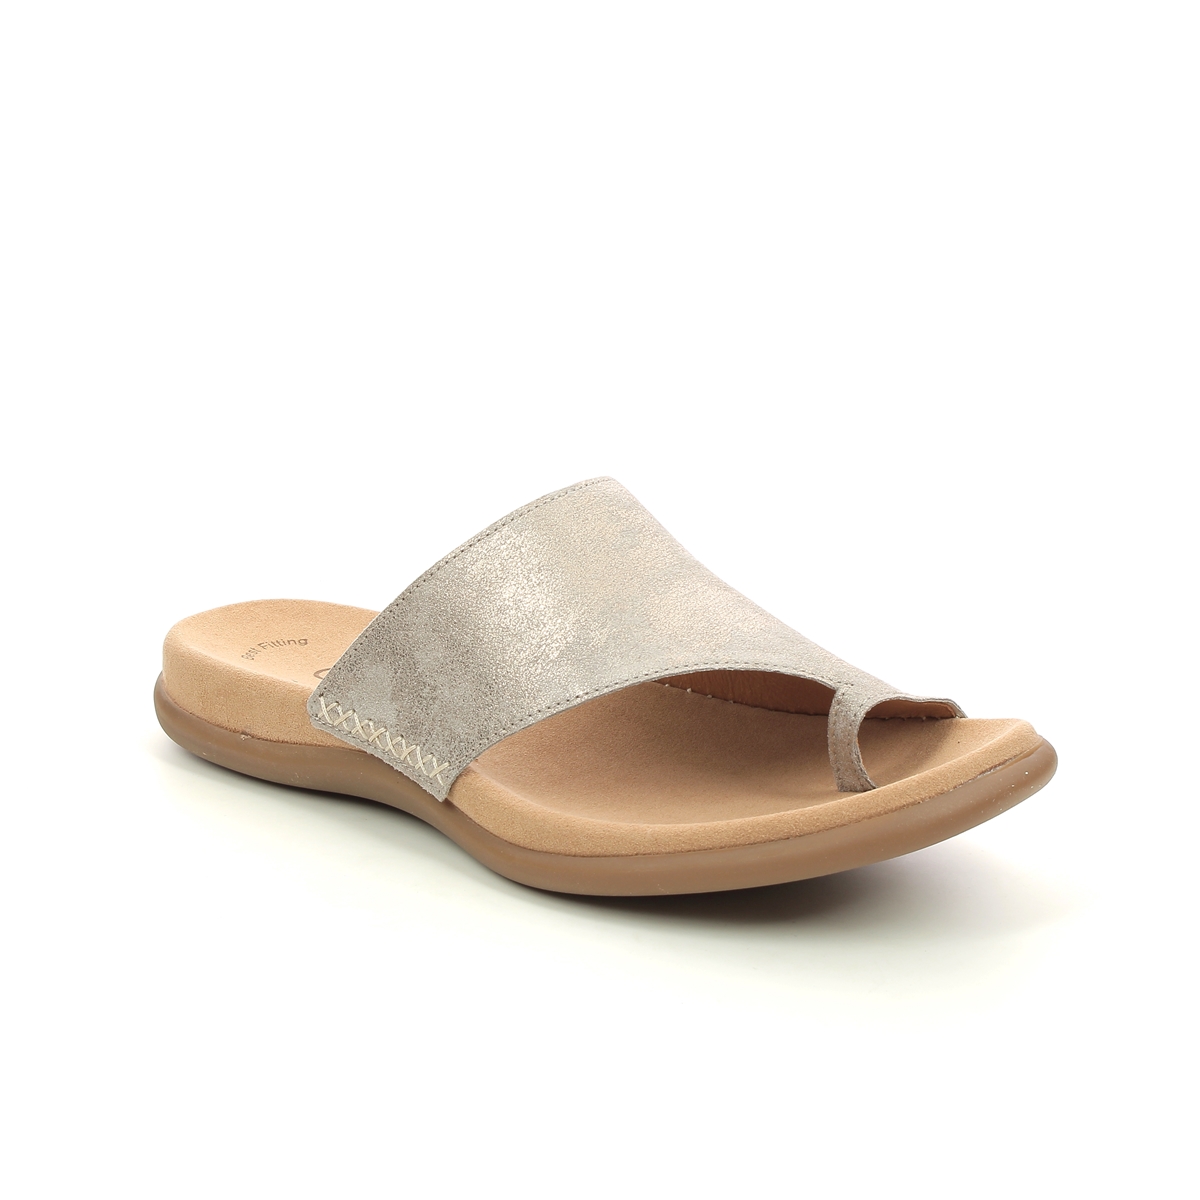 Gabor Lanzarote Beige Gold Womens Toe Post Sandals 23.700.62 in a Plain Leather in Size 36